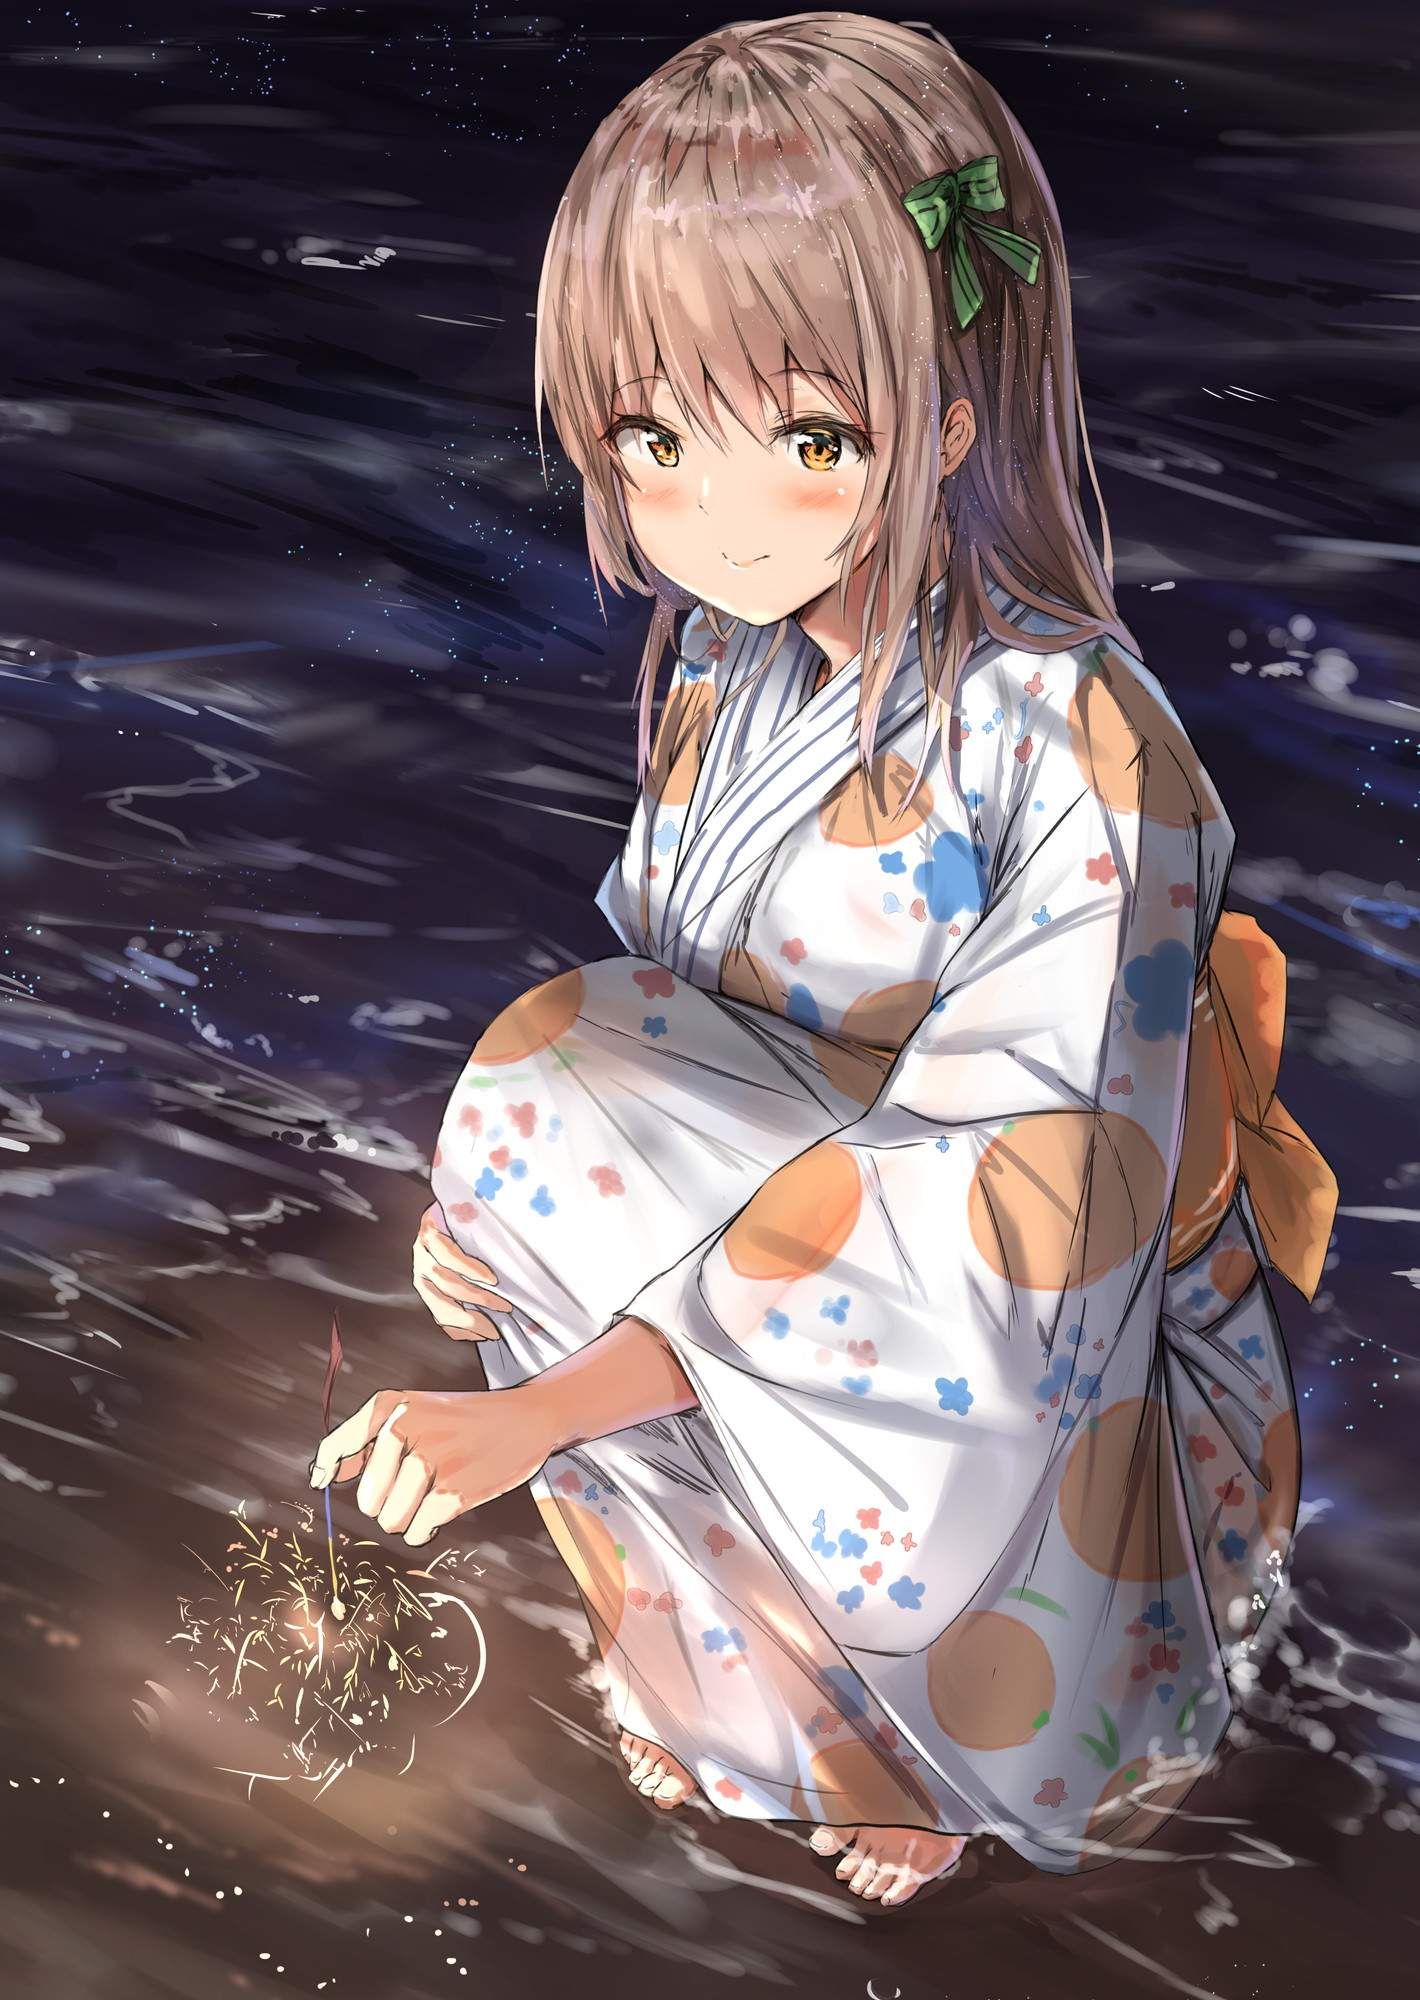 You want to see naughty images of kimono and yukata, right? 11